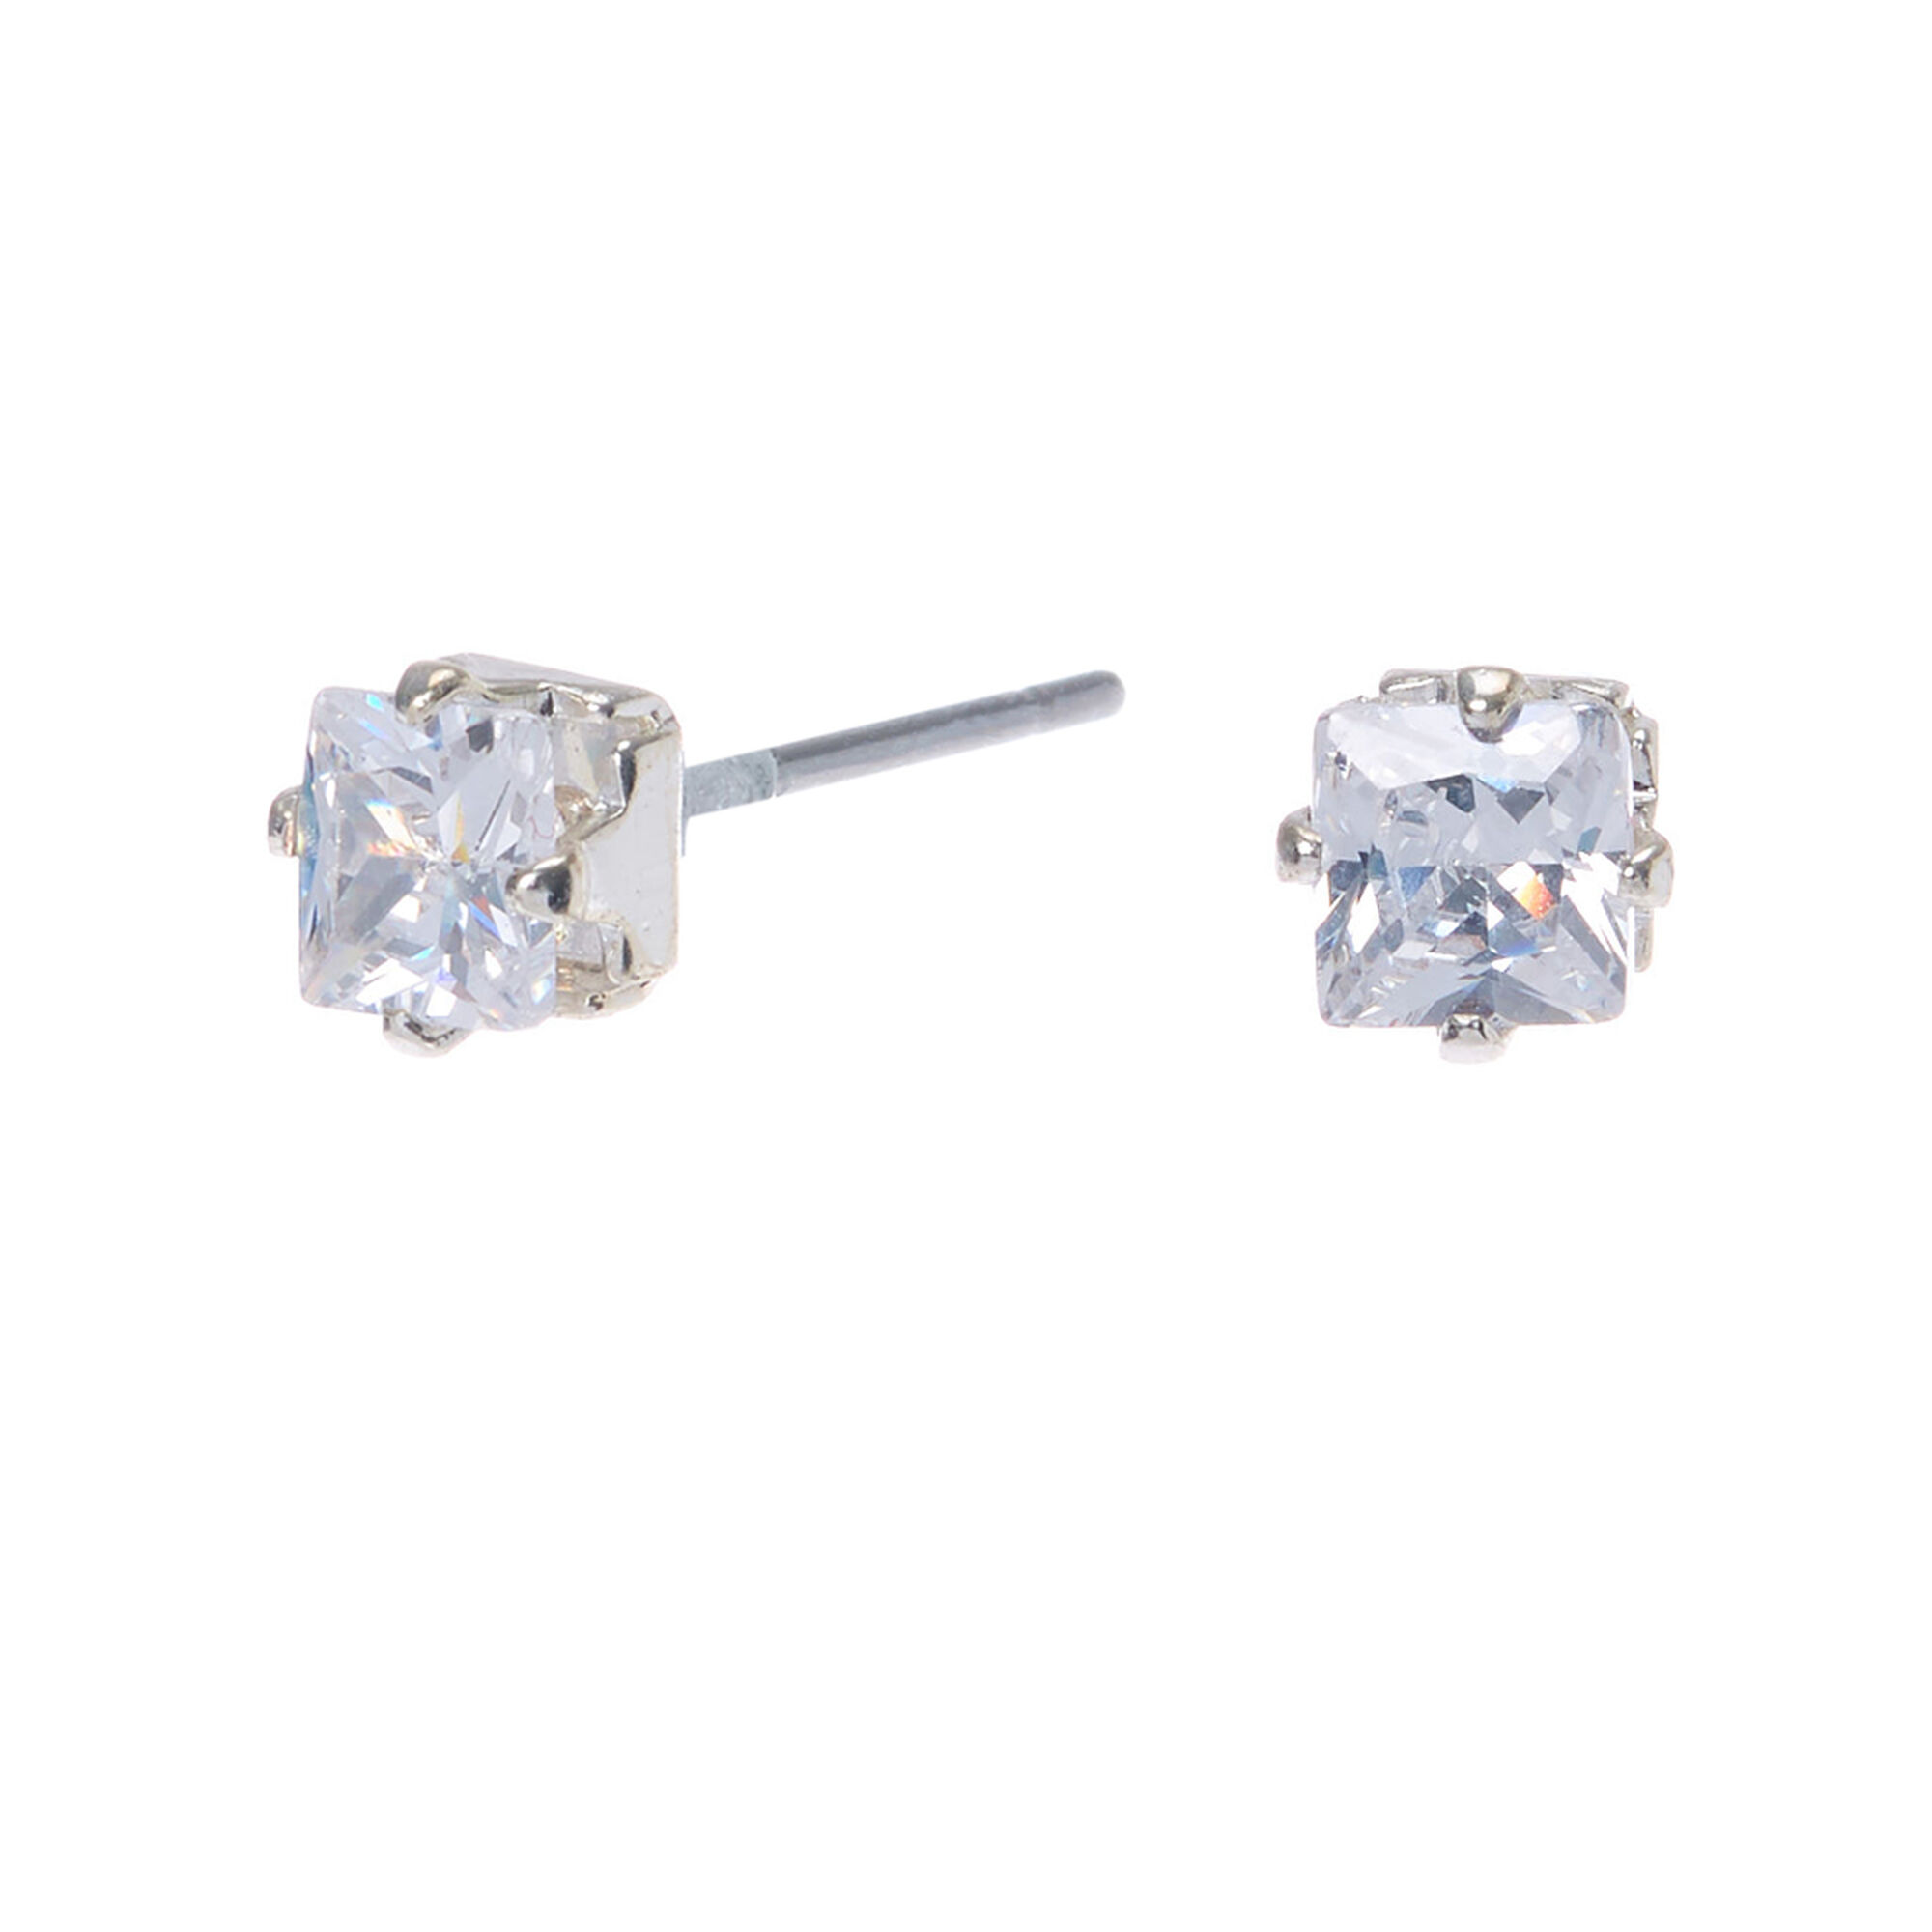 View Claires Tone Cubic Zirconia 4MM Square Stud Earrings Silver information